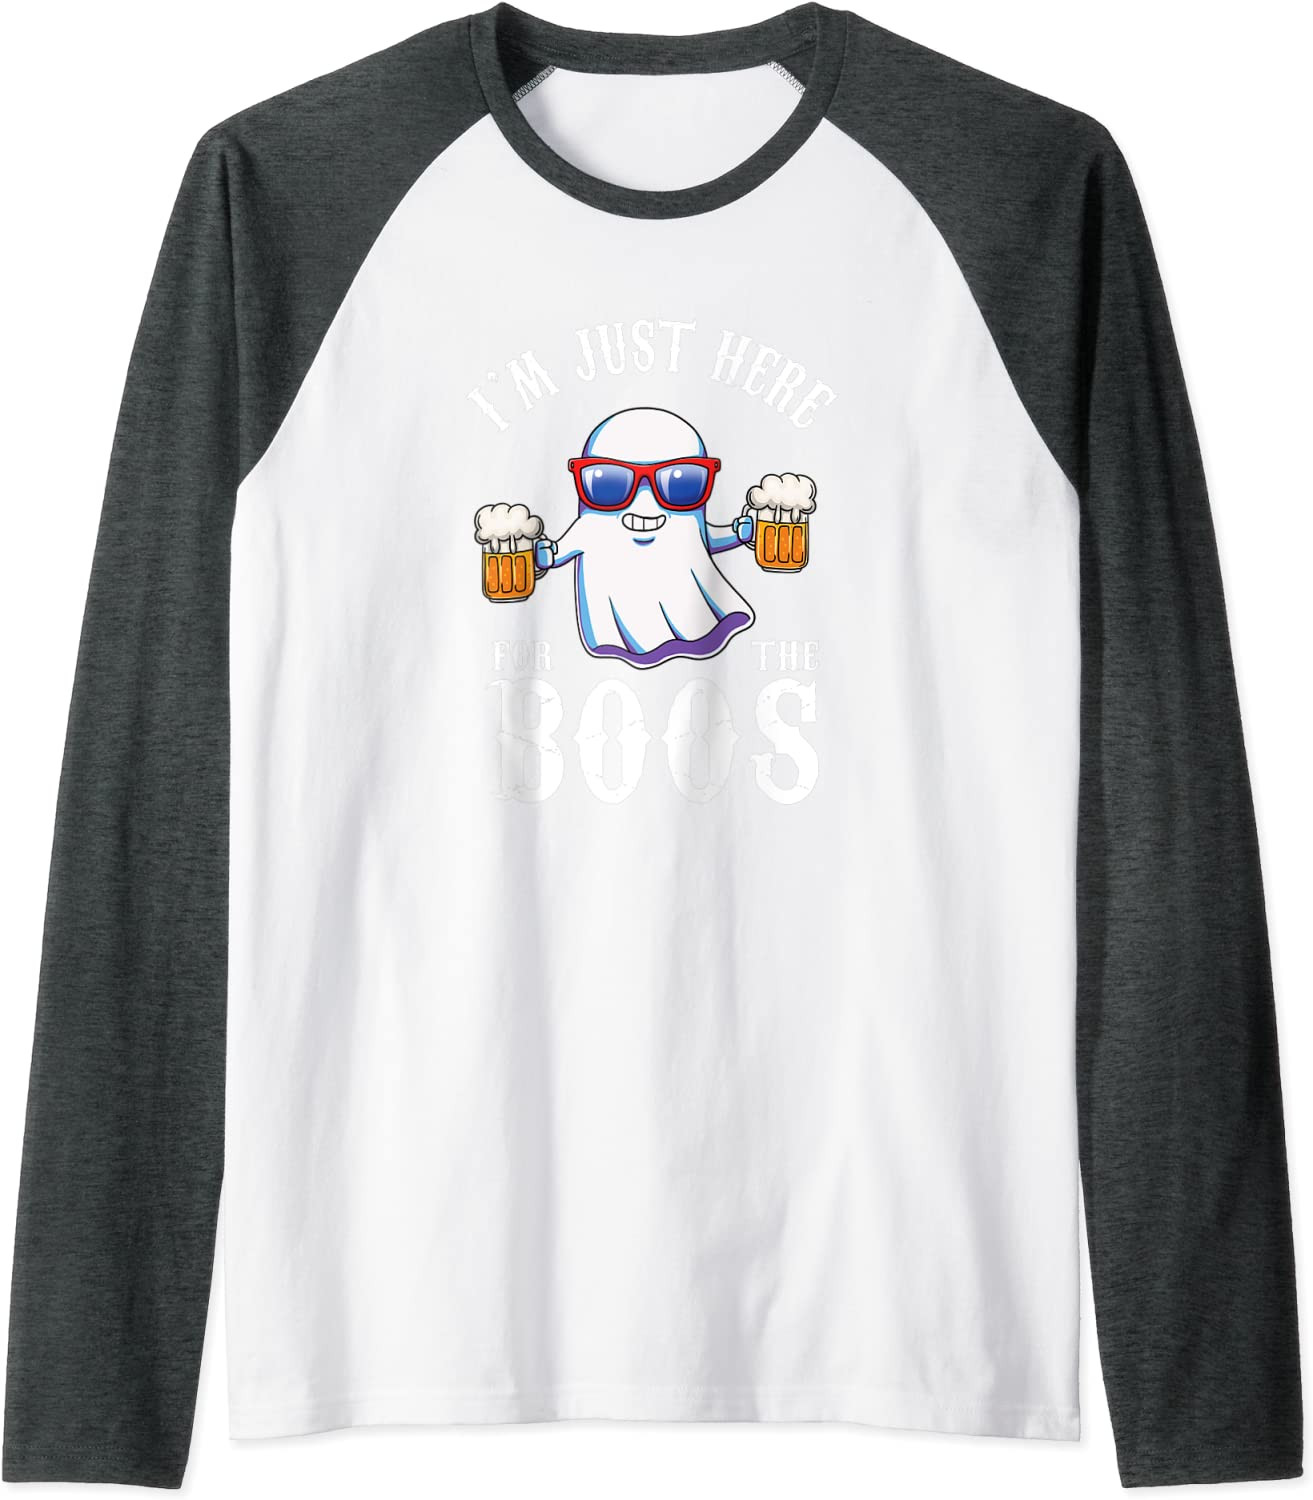 Halloween Booze Im Just Here For The Boos Drinking Ghost T-Shirt